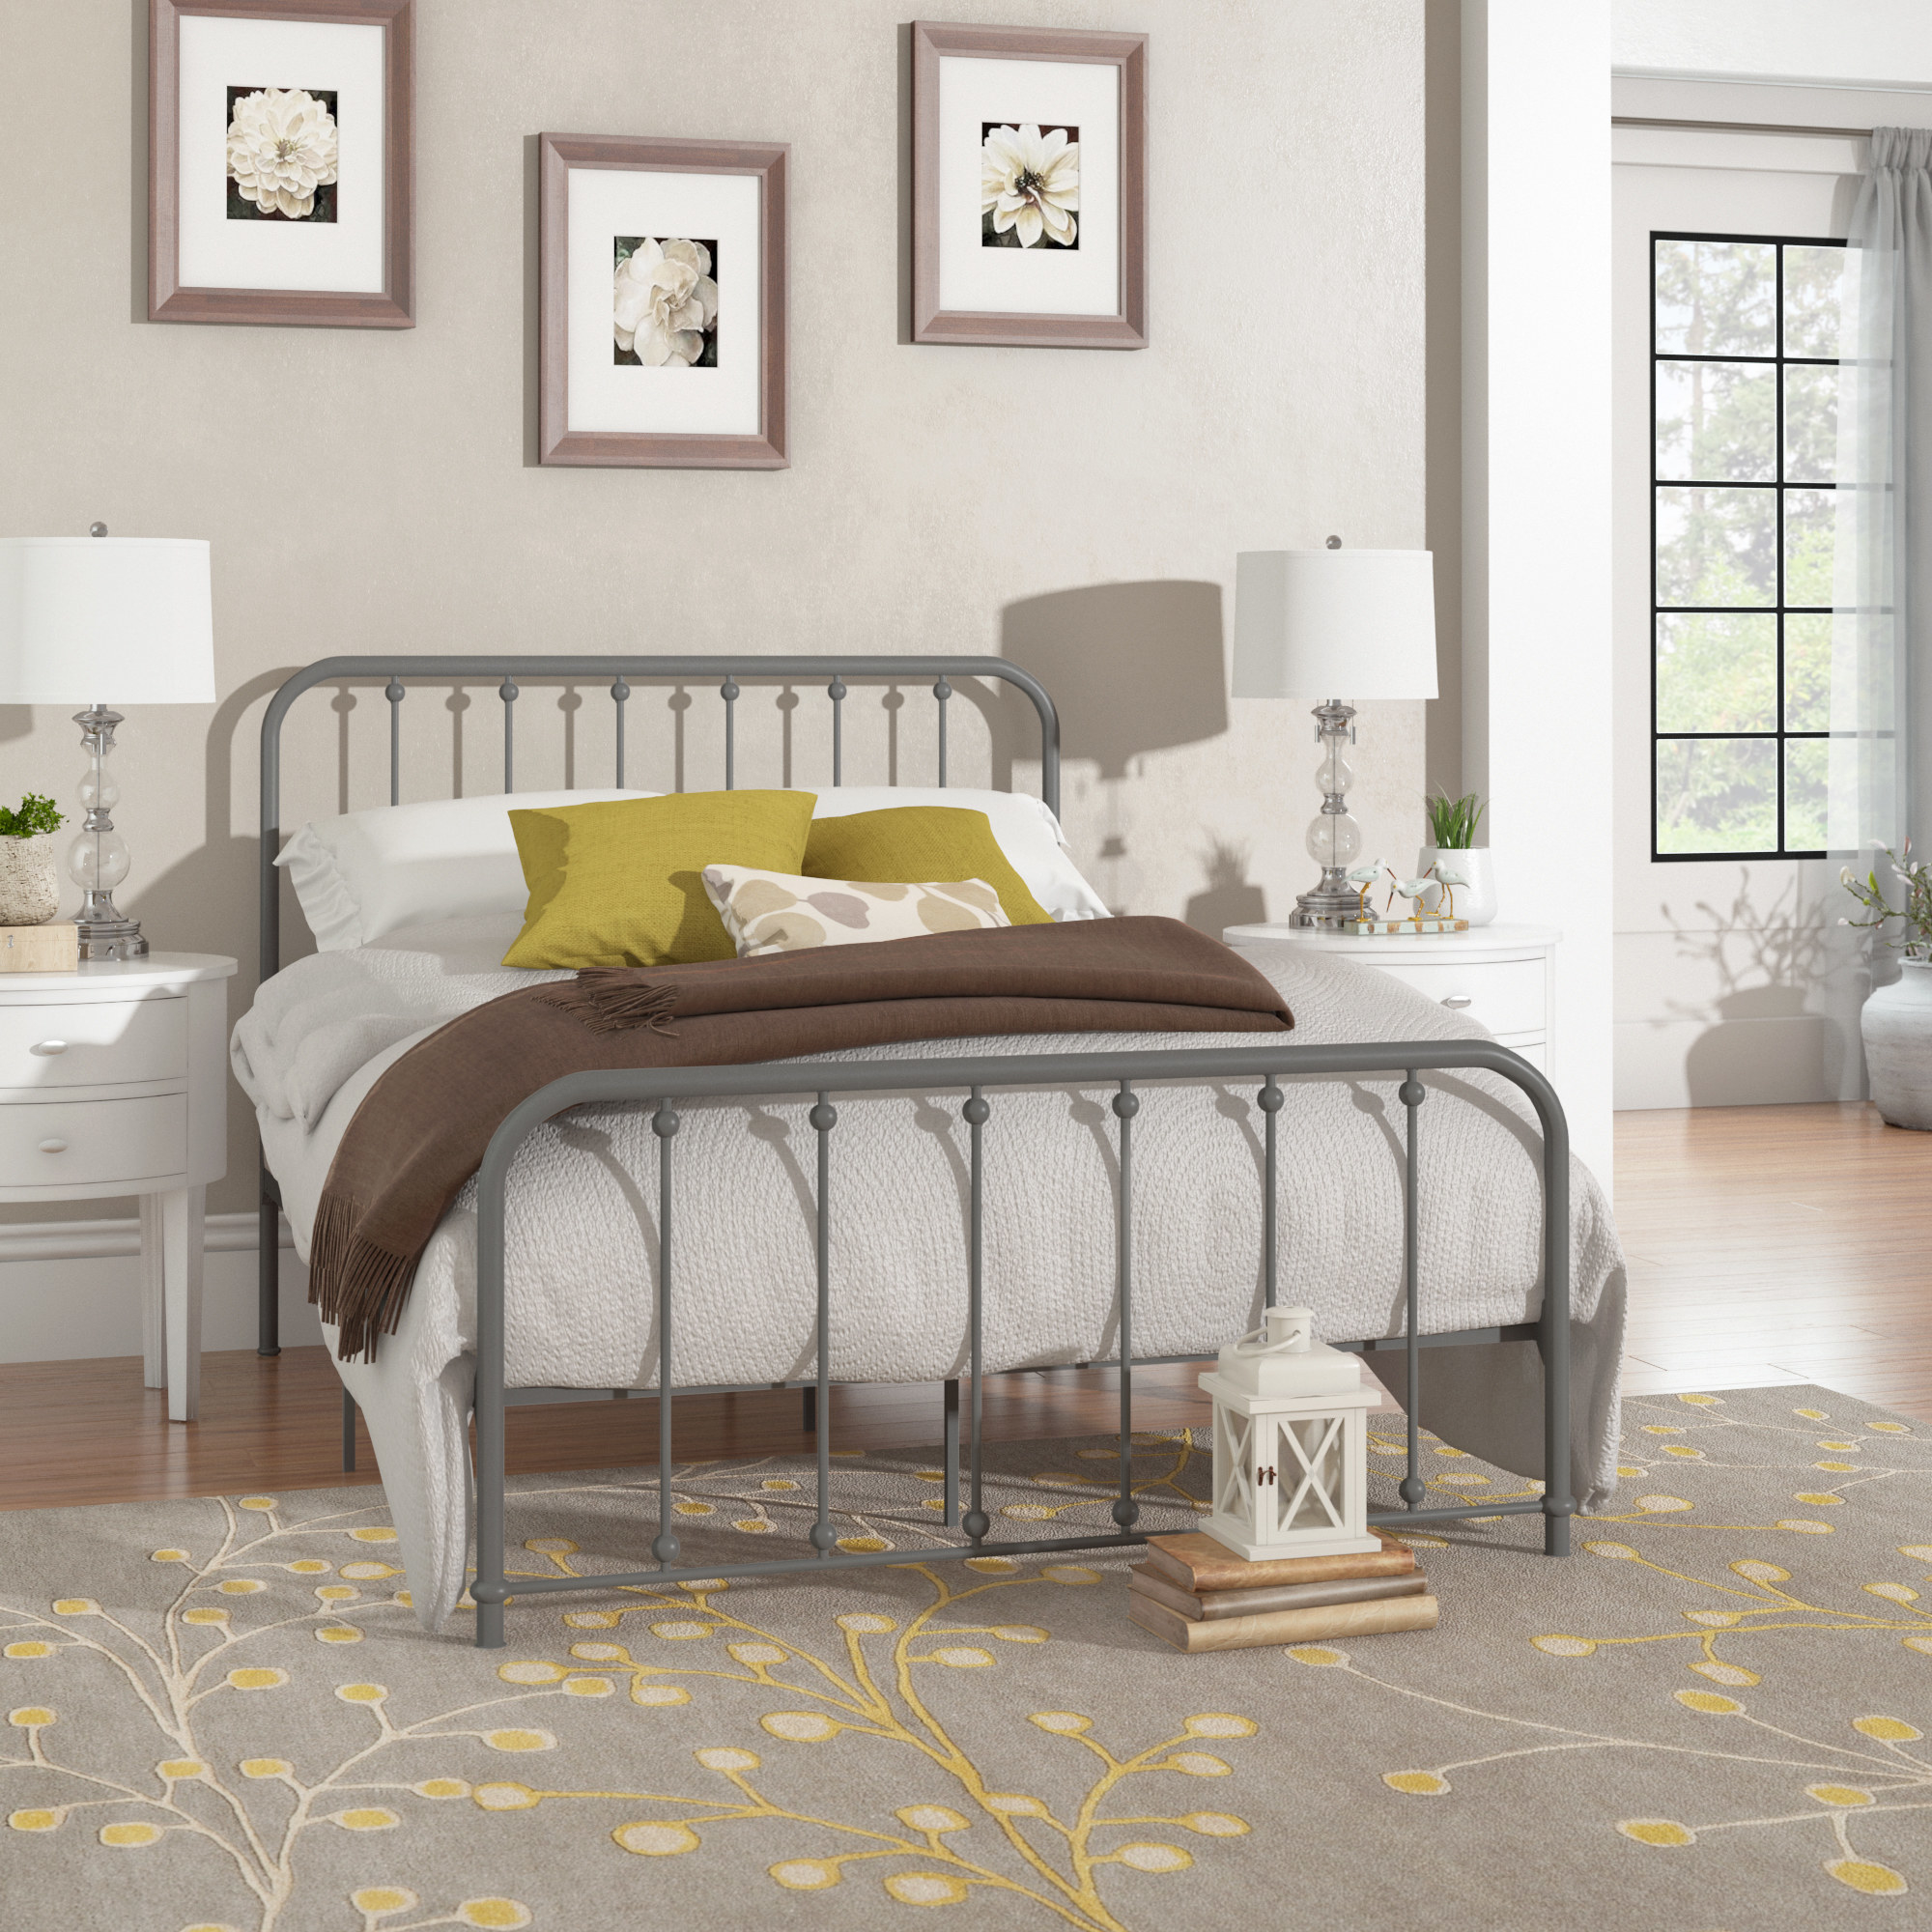 the grey bed with white and brown bedding